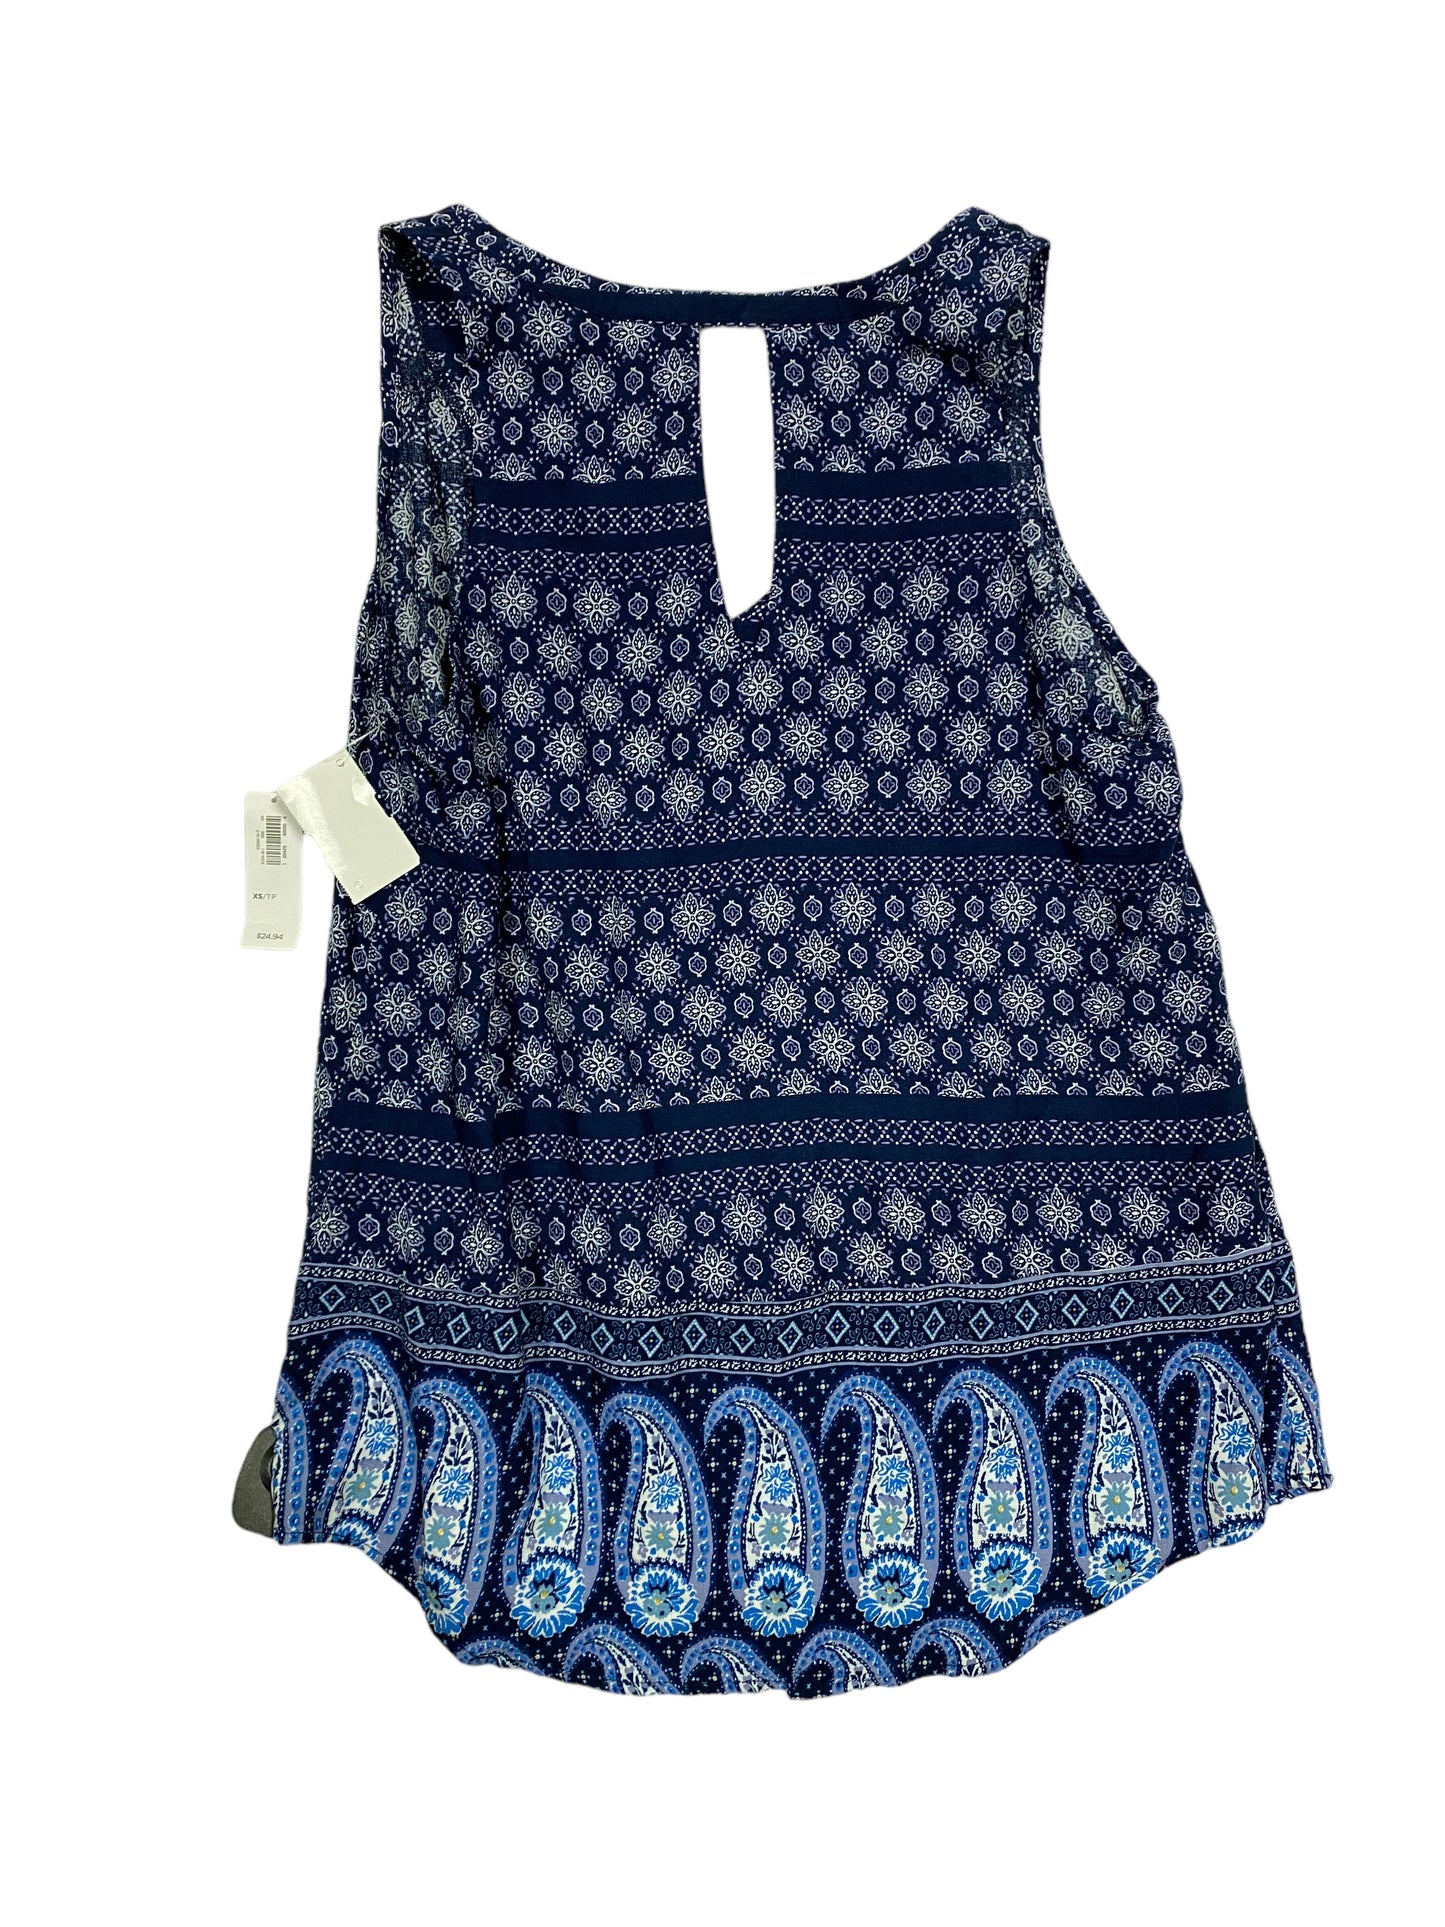 Blue Top Sleeveless Old Navy, Size Xs